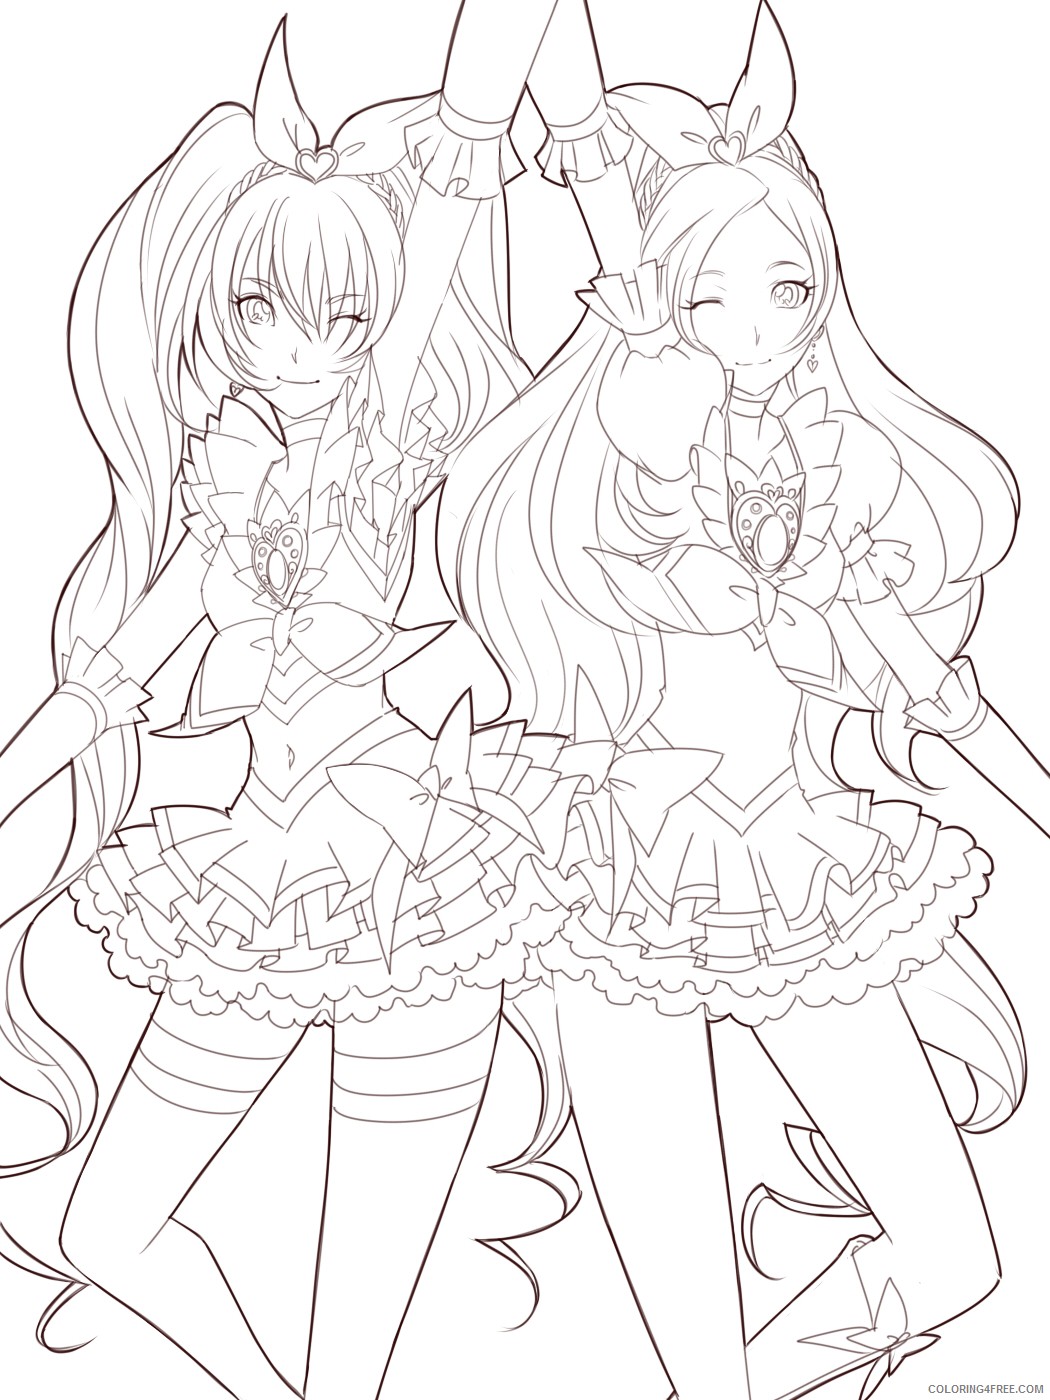 manga girl coloring pages for adults Coloring4free